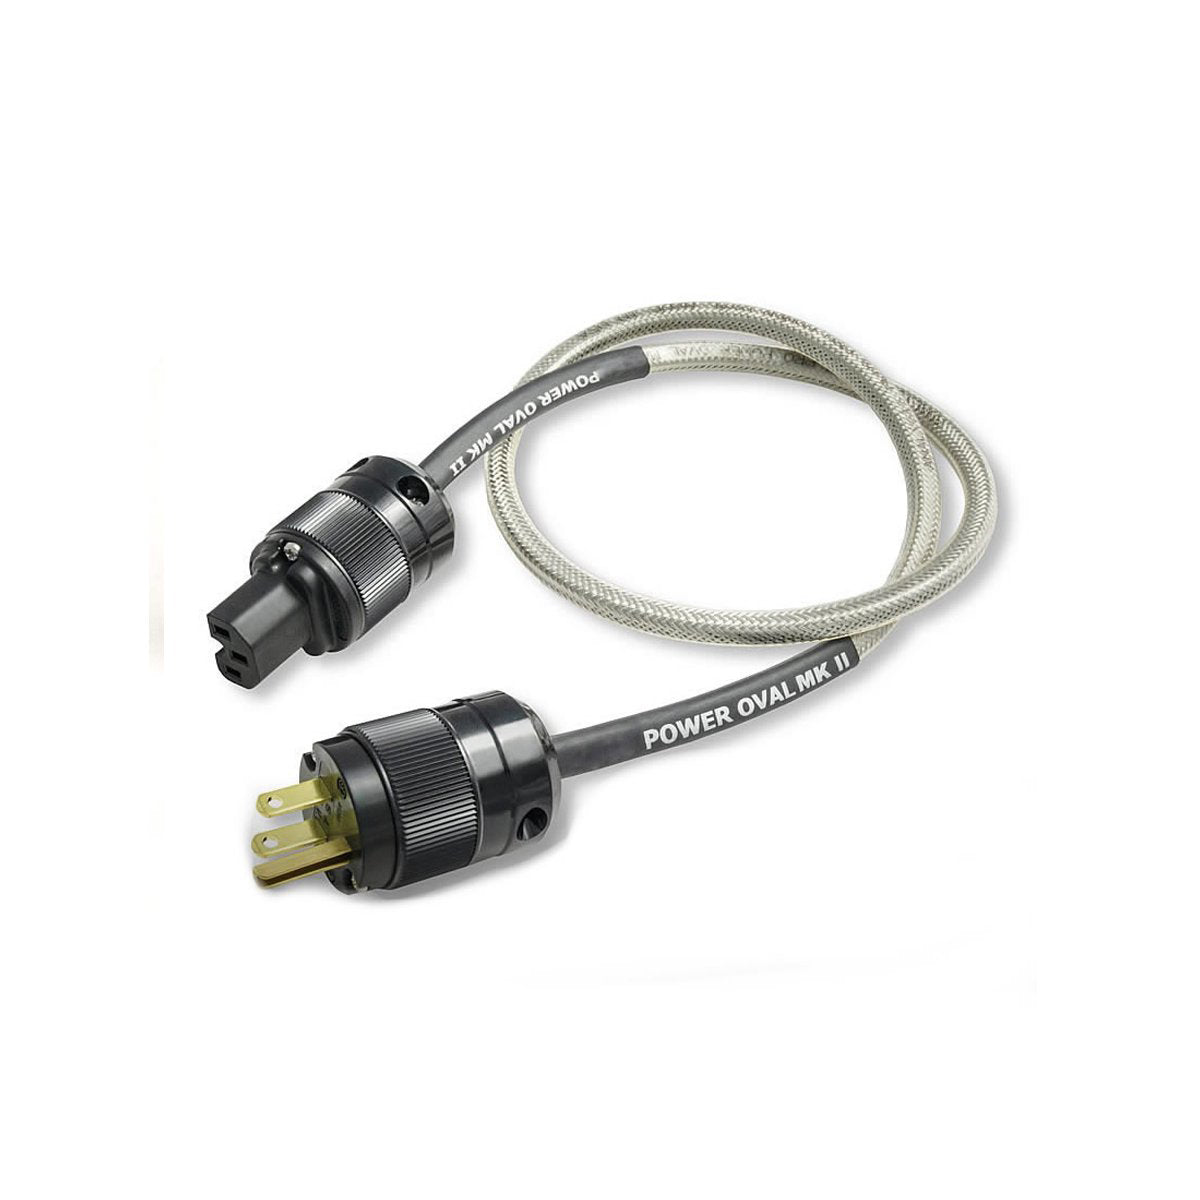 Analysis Plus Power Oval 2 Furutech Gold Plug Power Cable - The Audio Experts